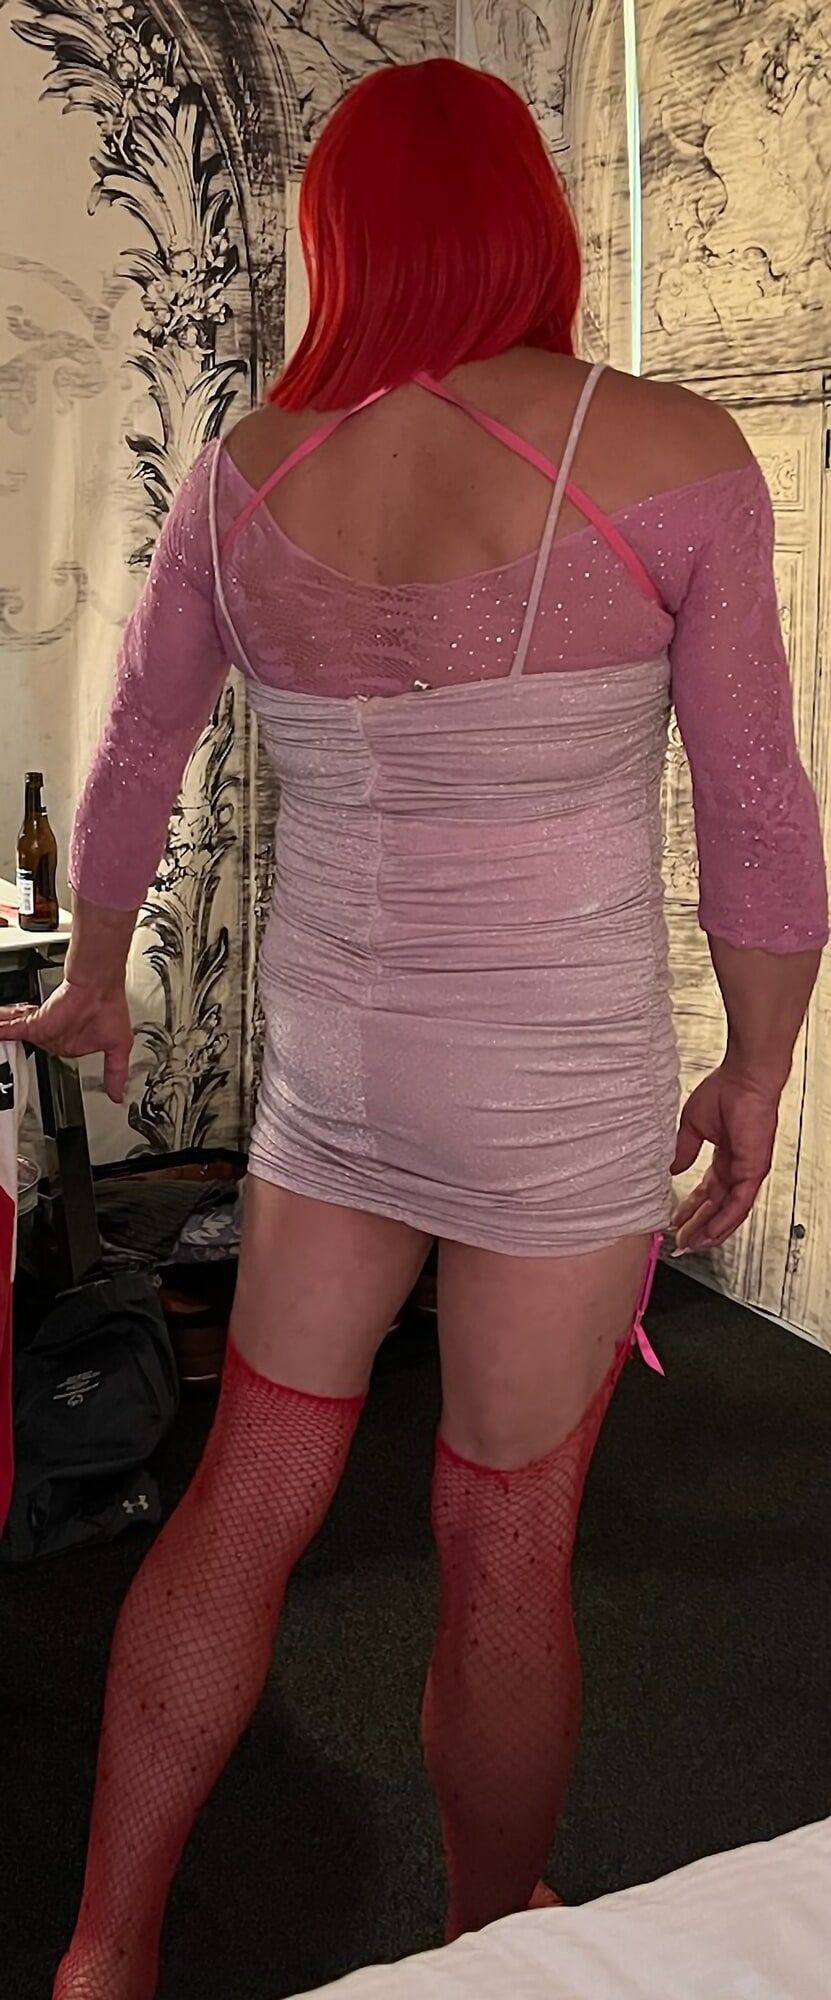 Horny sub acting out sissy #27